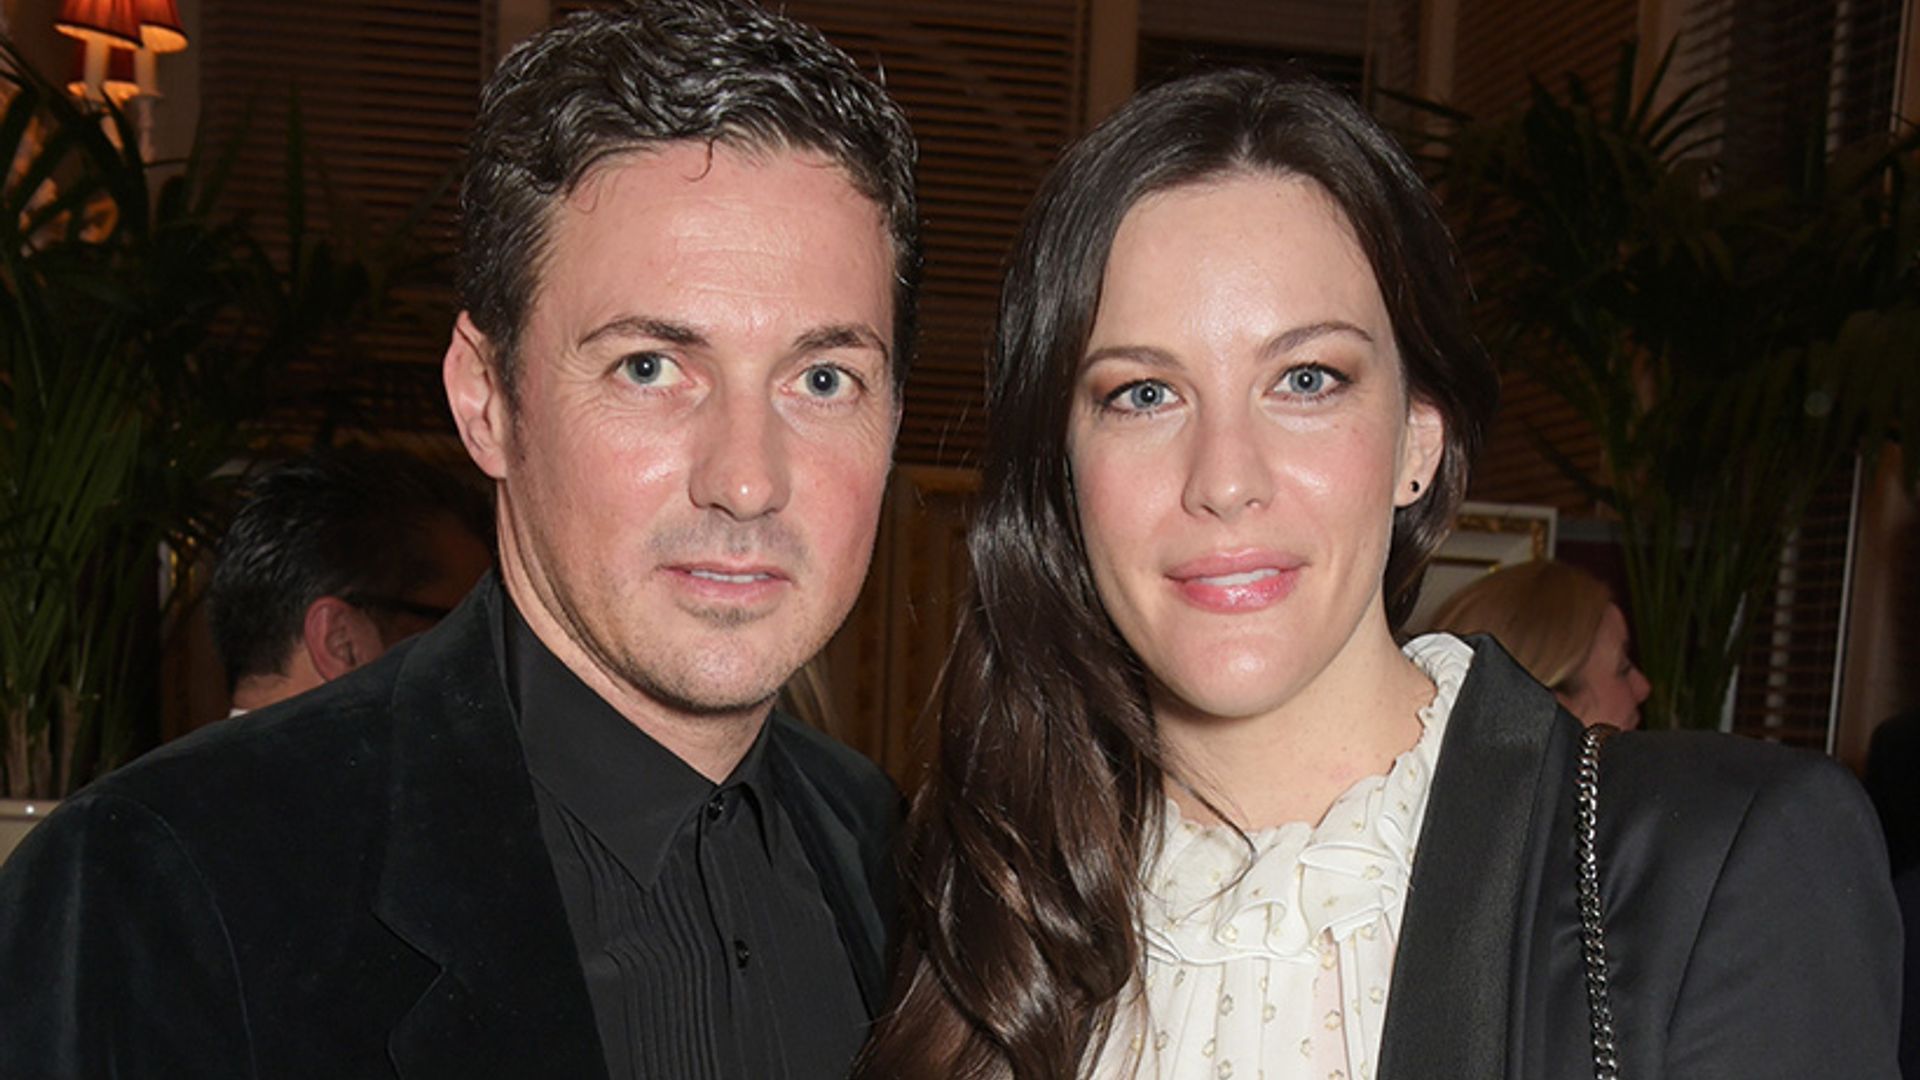 Liv Tyler shares first photo of her baby daughter: find out her name